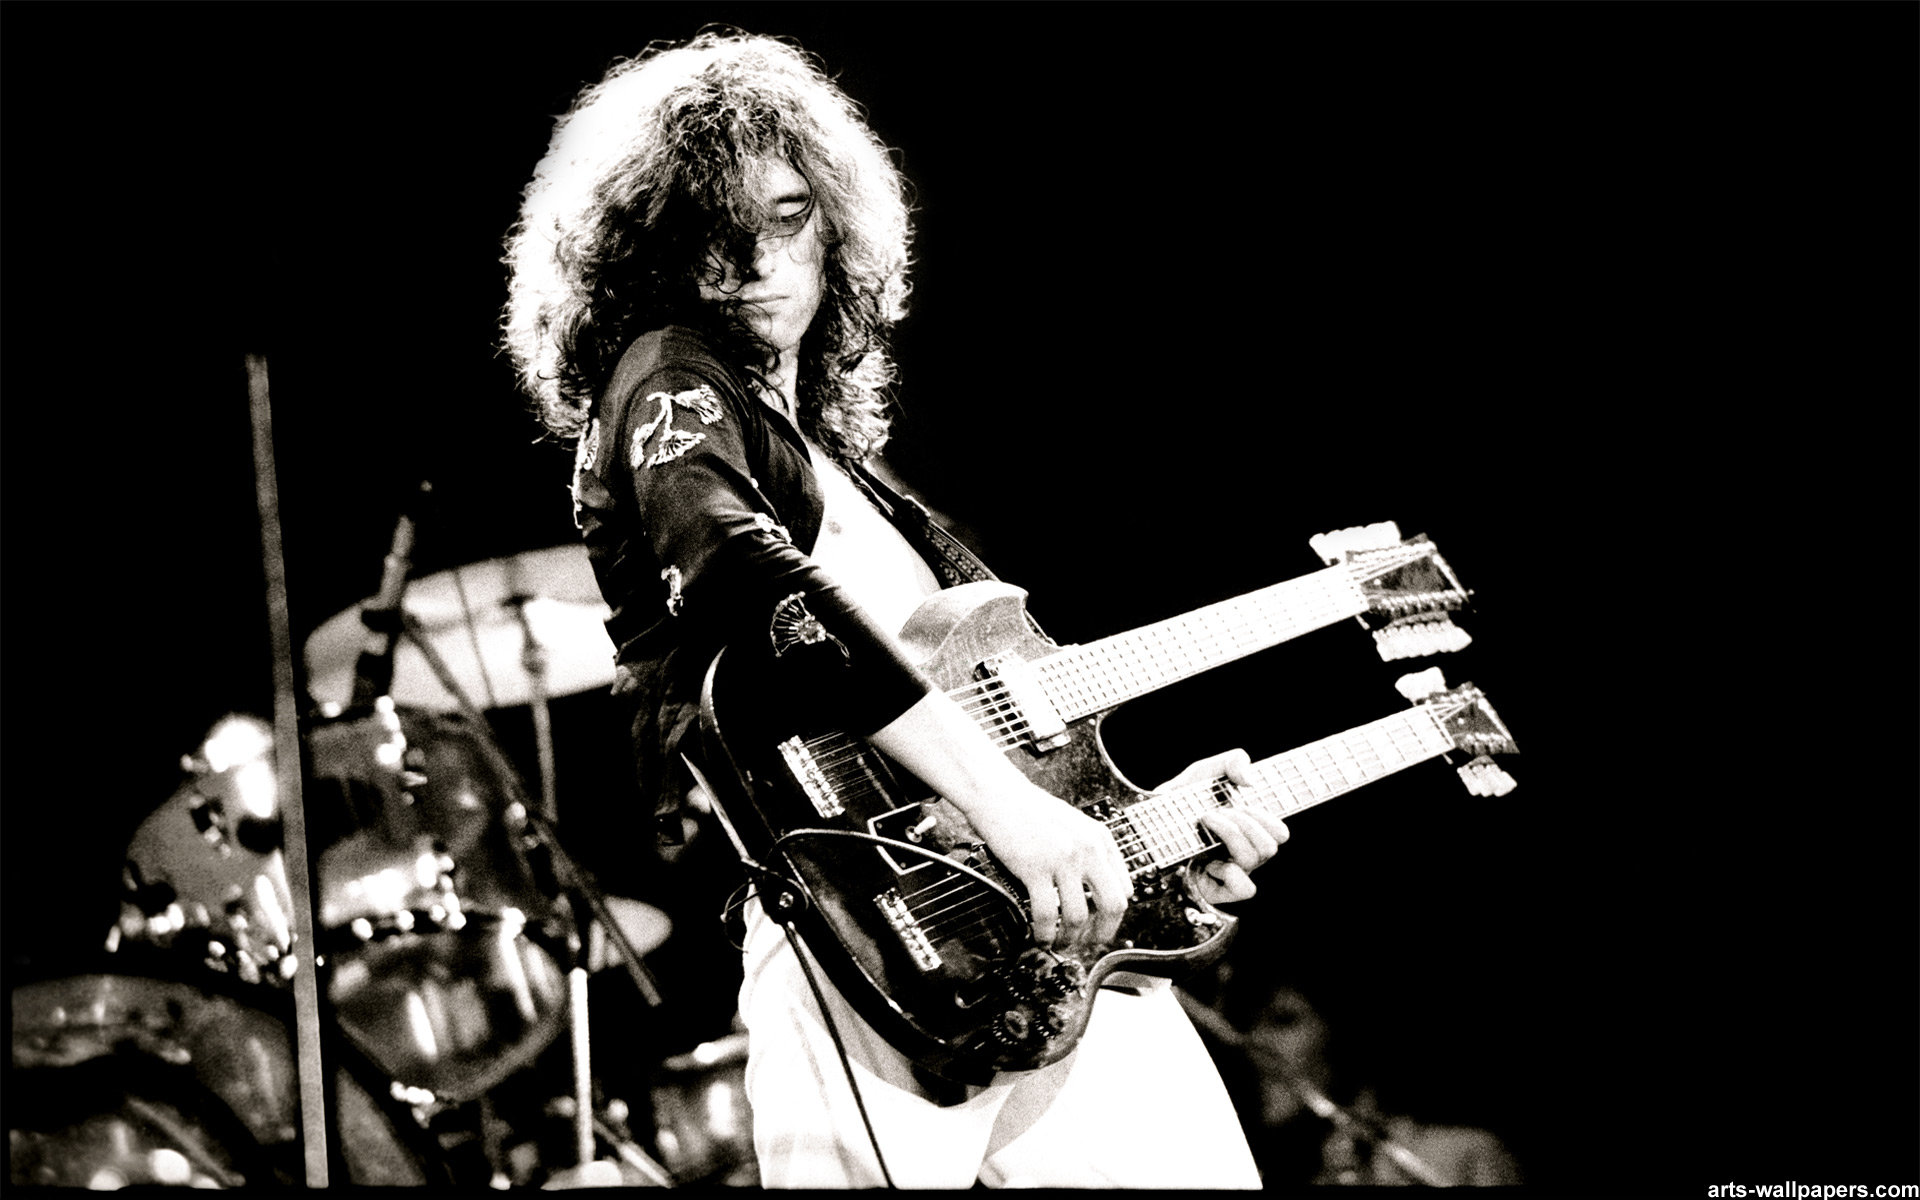 led, Zeppelin, Hard, Rock, Classic, Groups, Bands, Jimmy, Page, Robert, Plant, Album, Covers, Concert, Guitars, Drums Wallpaper